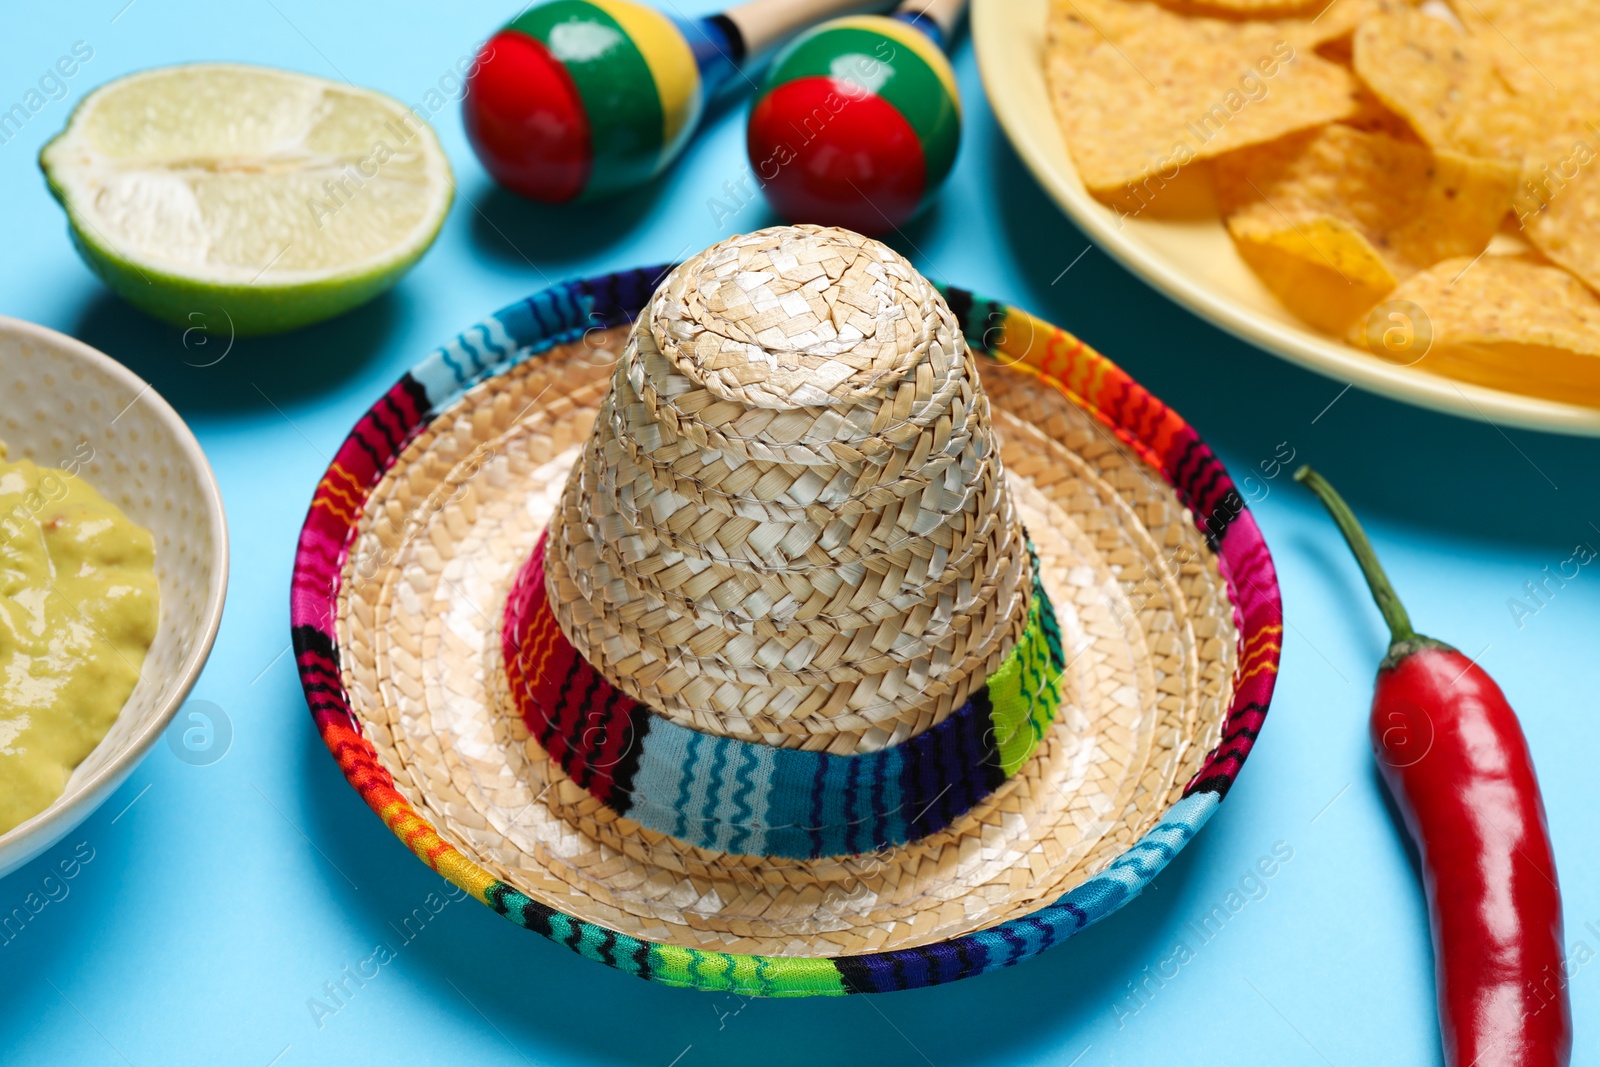 Photo of Mexican sombrero hat, chili pepper, maracas and nachos chips on light blue background